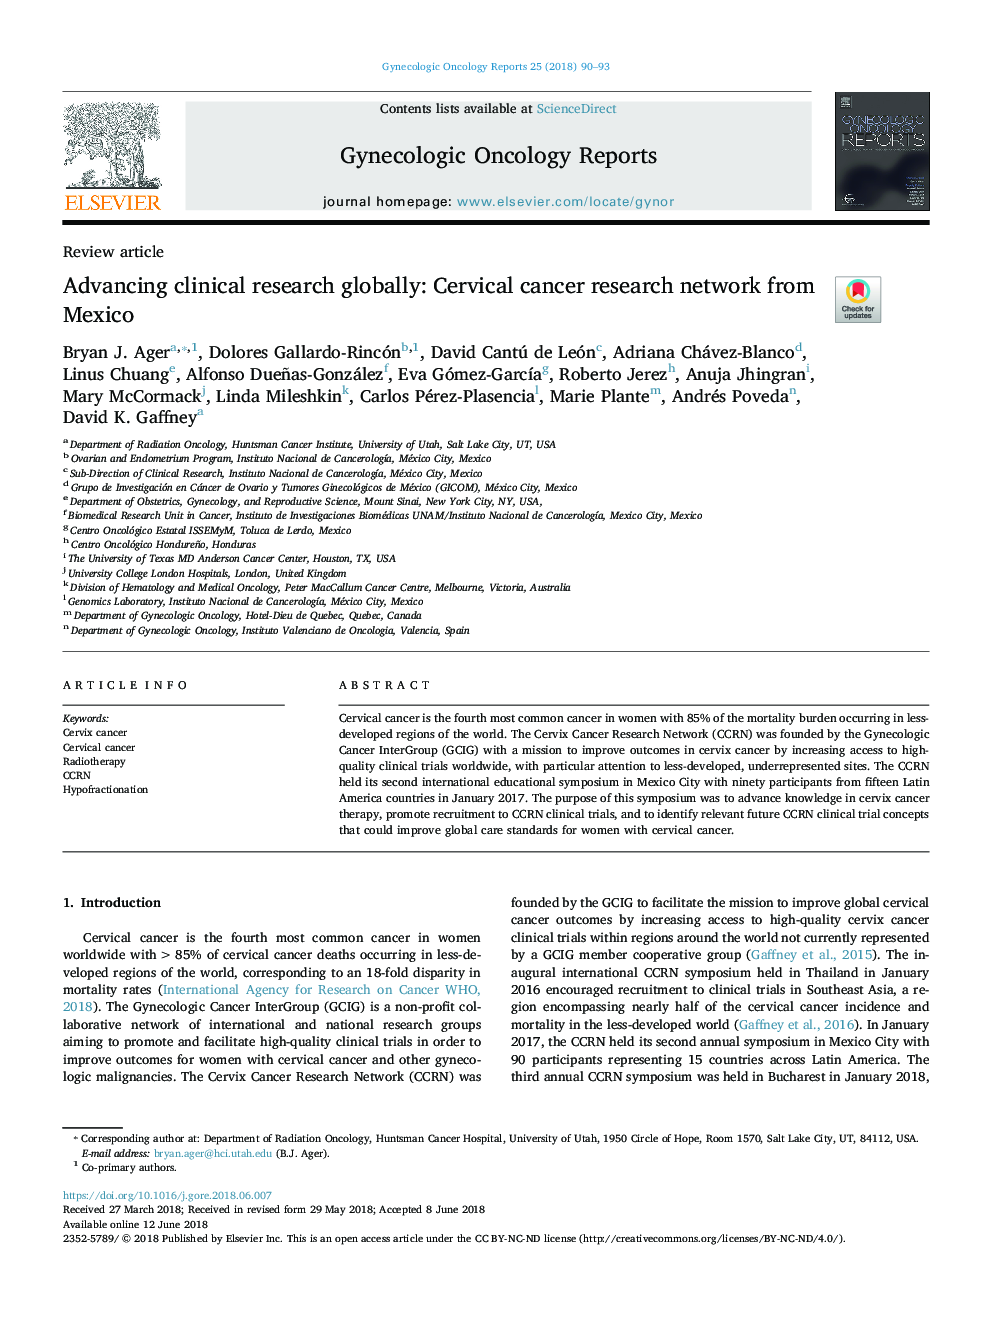 Advancing clinical research globally: Cervical cancer research network from Mexico